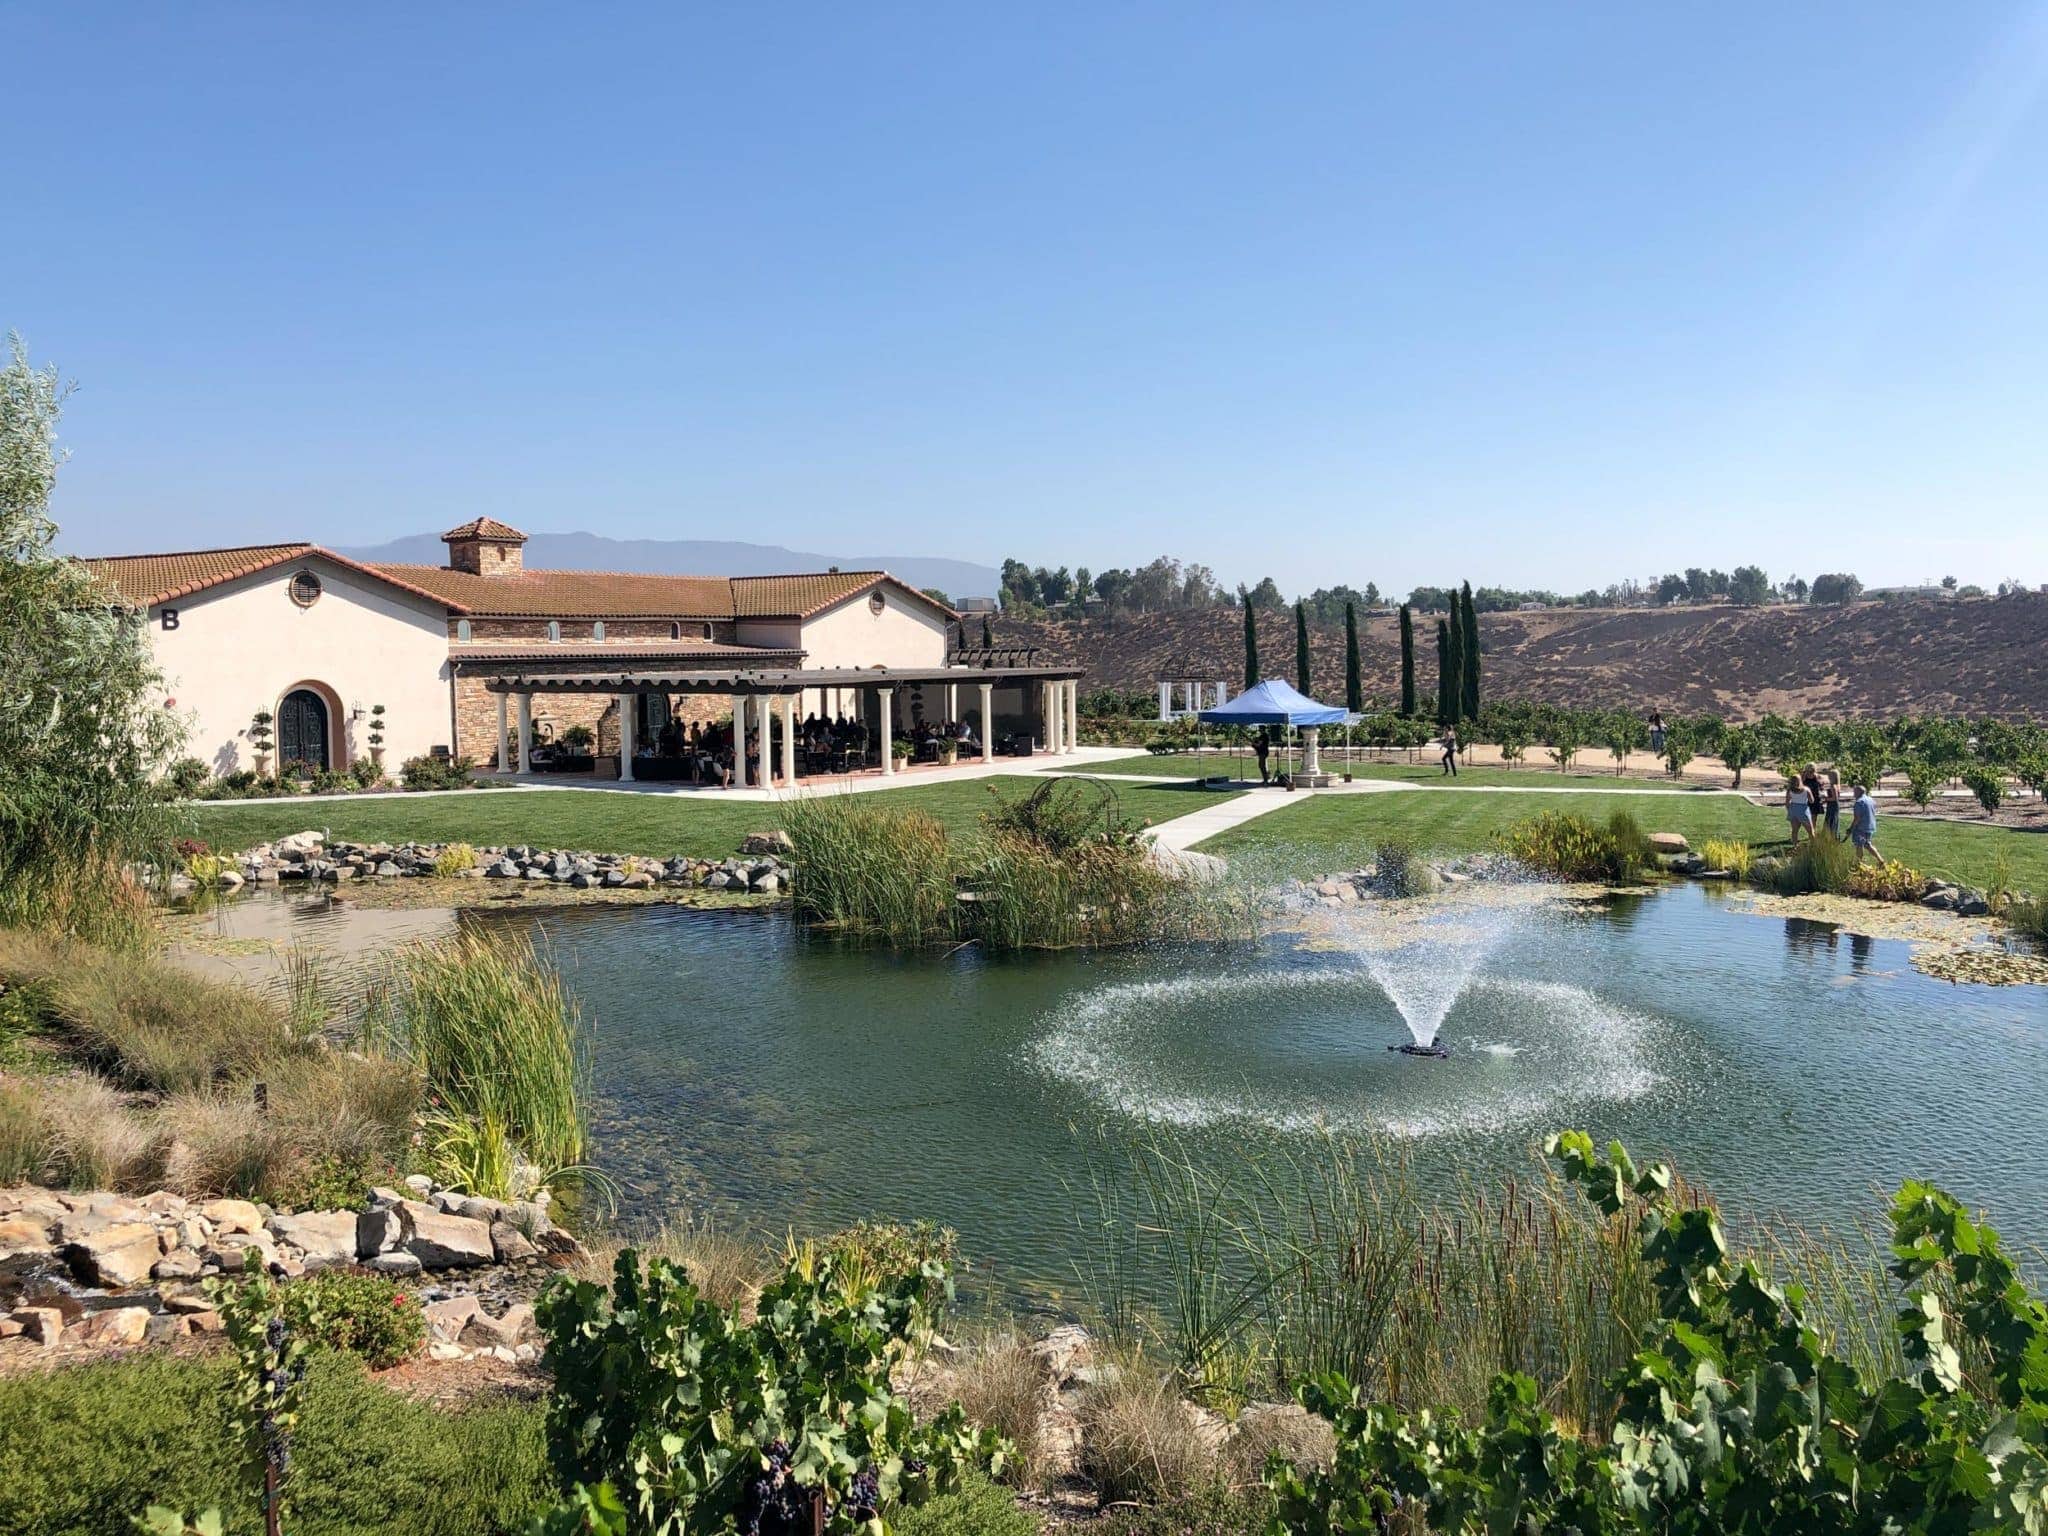 The grounds at Avensole, which offers wine tasting in Temecula.